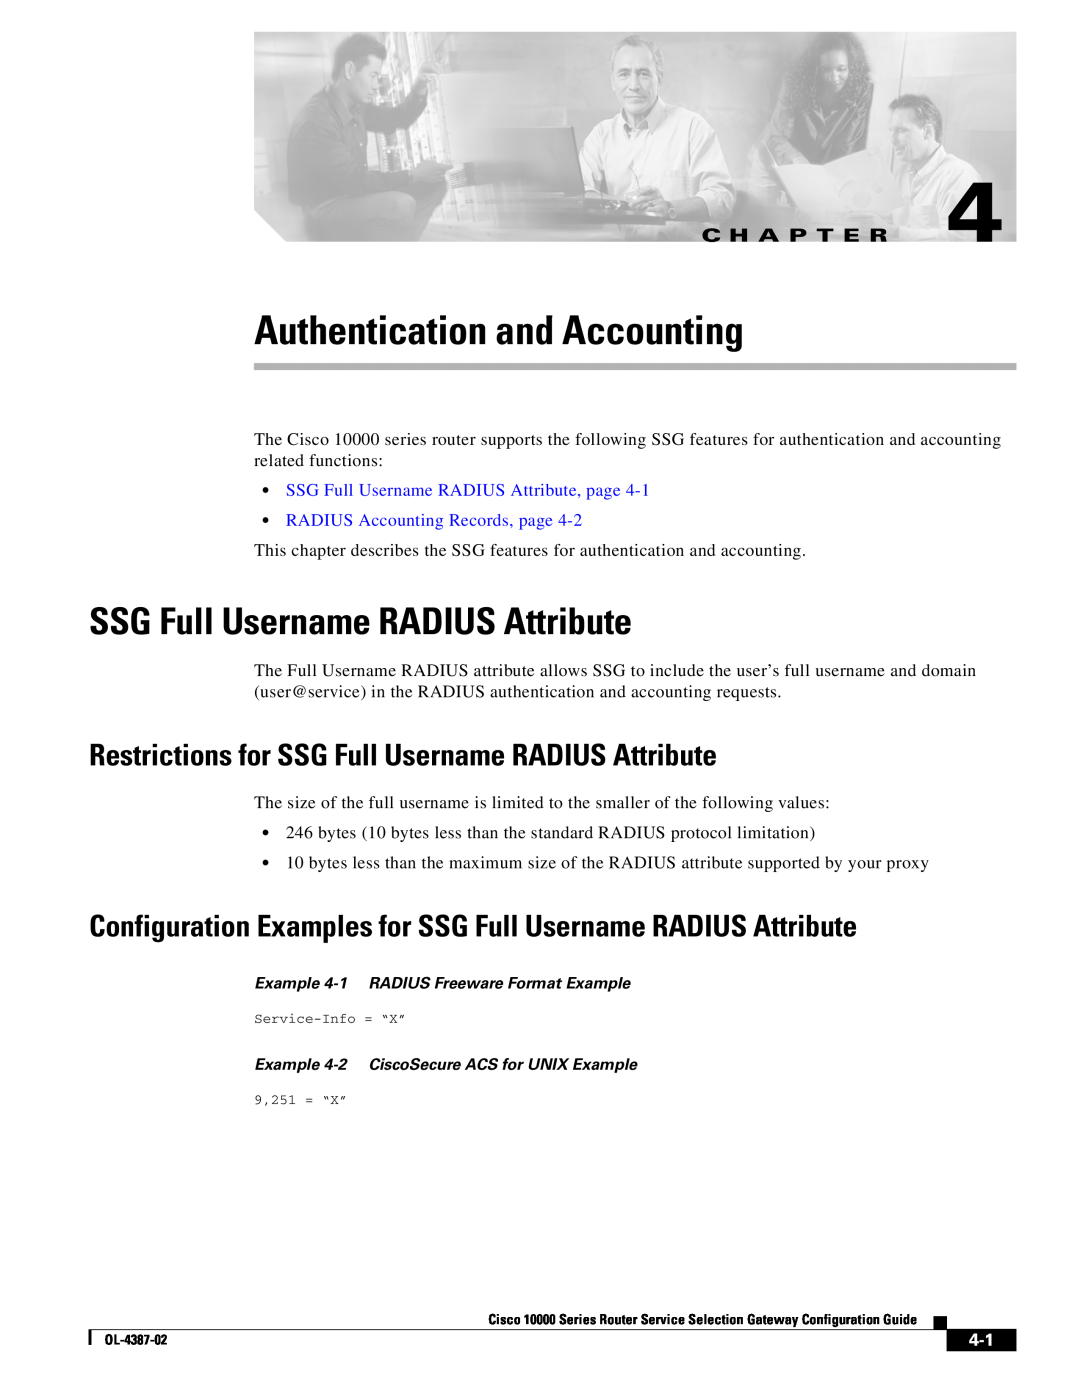 Cisco Systems OL-4387-02 manual Authentication and Accounting, SSG Full Username RADIUS Attribute, C H A P T E R 